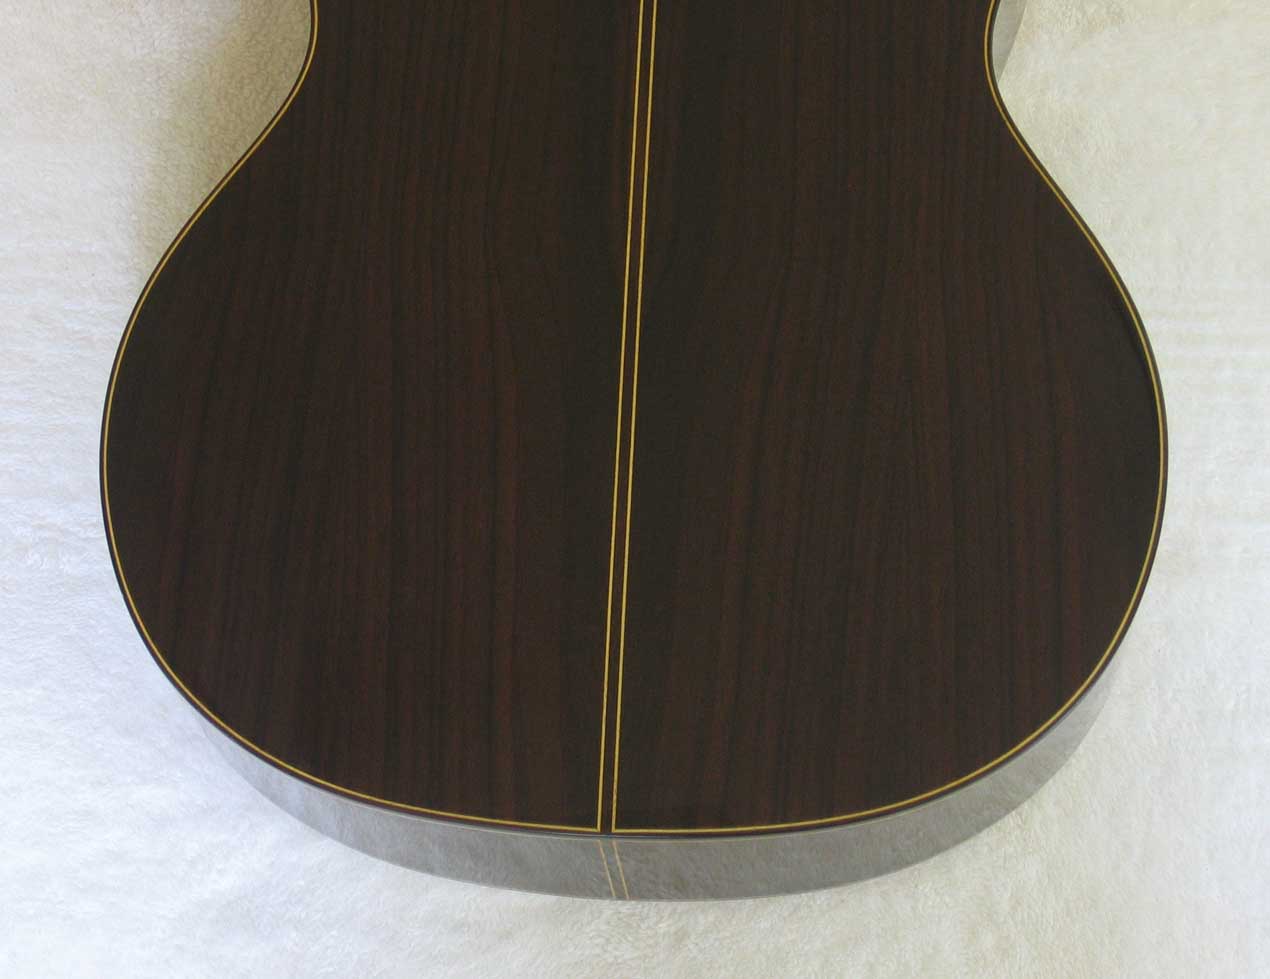 NEW BARTOLEX SRS10 10-String Classical Harp Guitar [Spruce/Indian Rosewood]